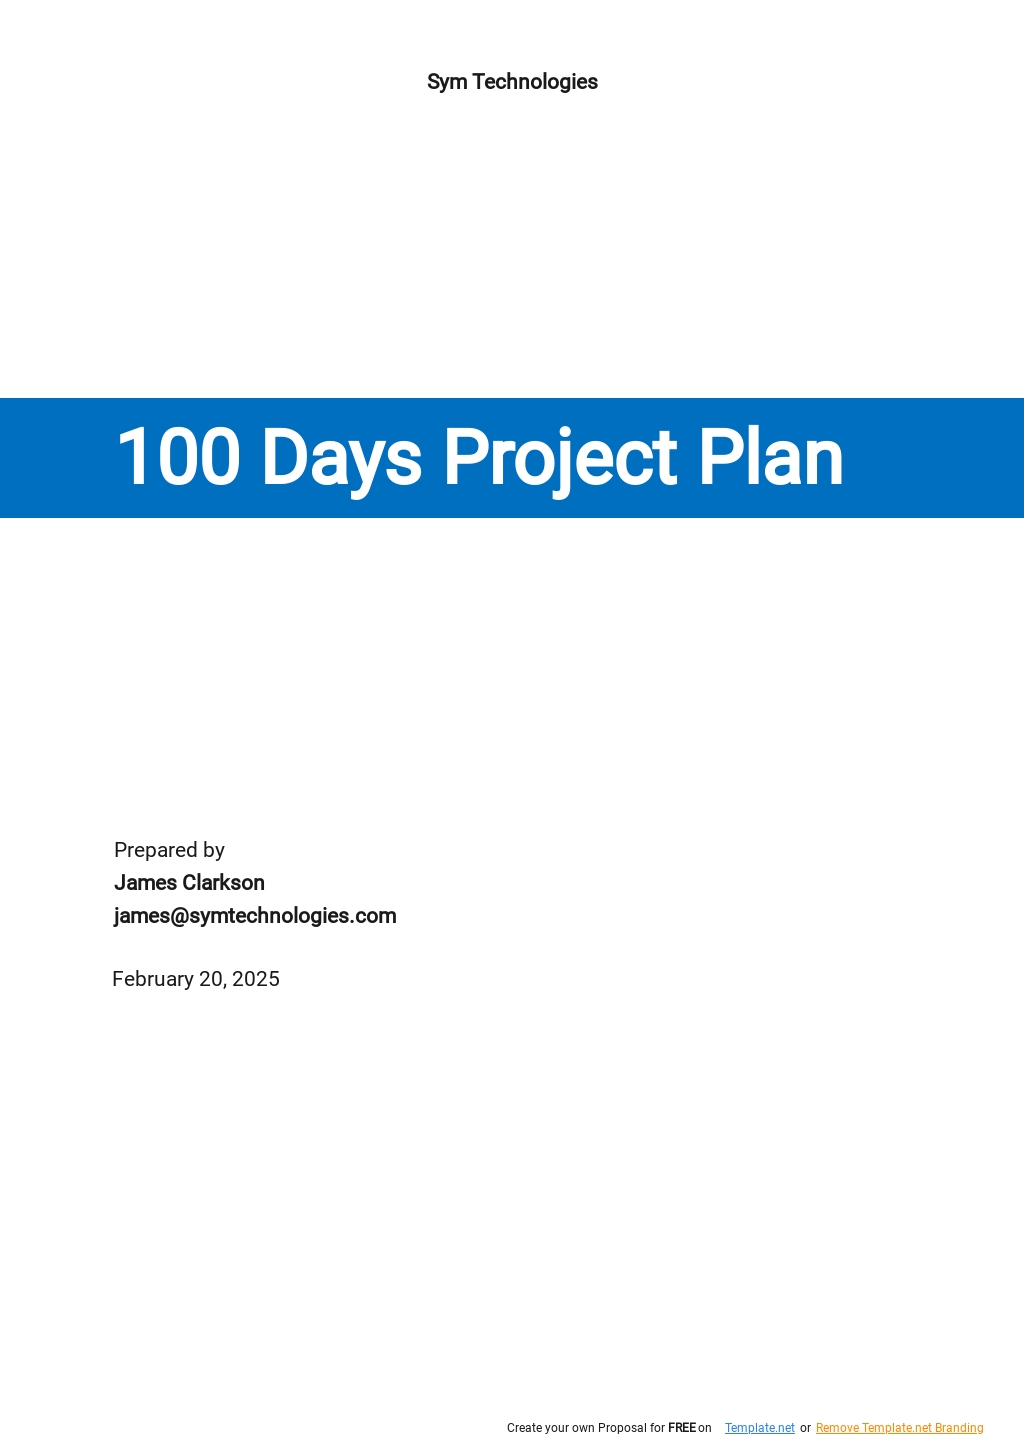 100 Day Project Plan Template.jpe